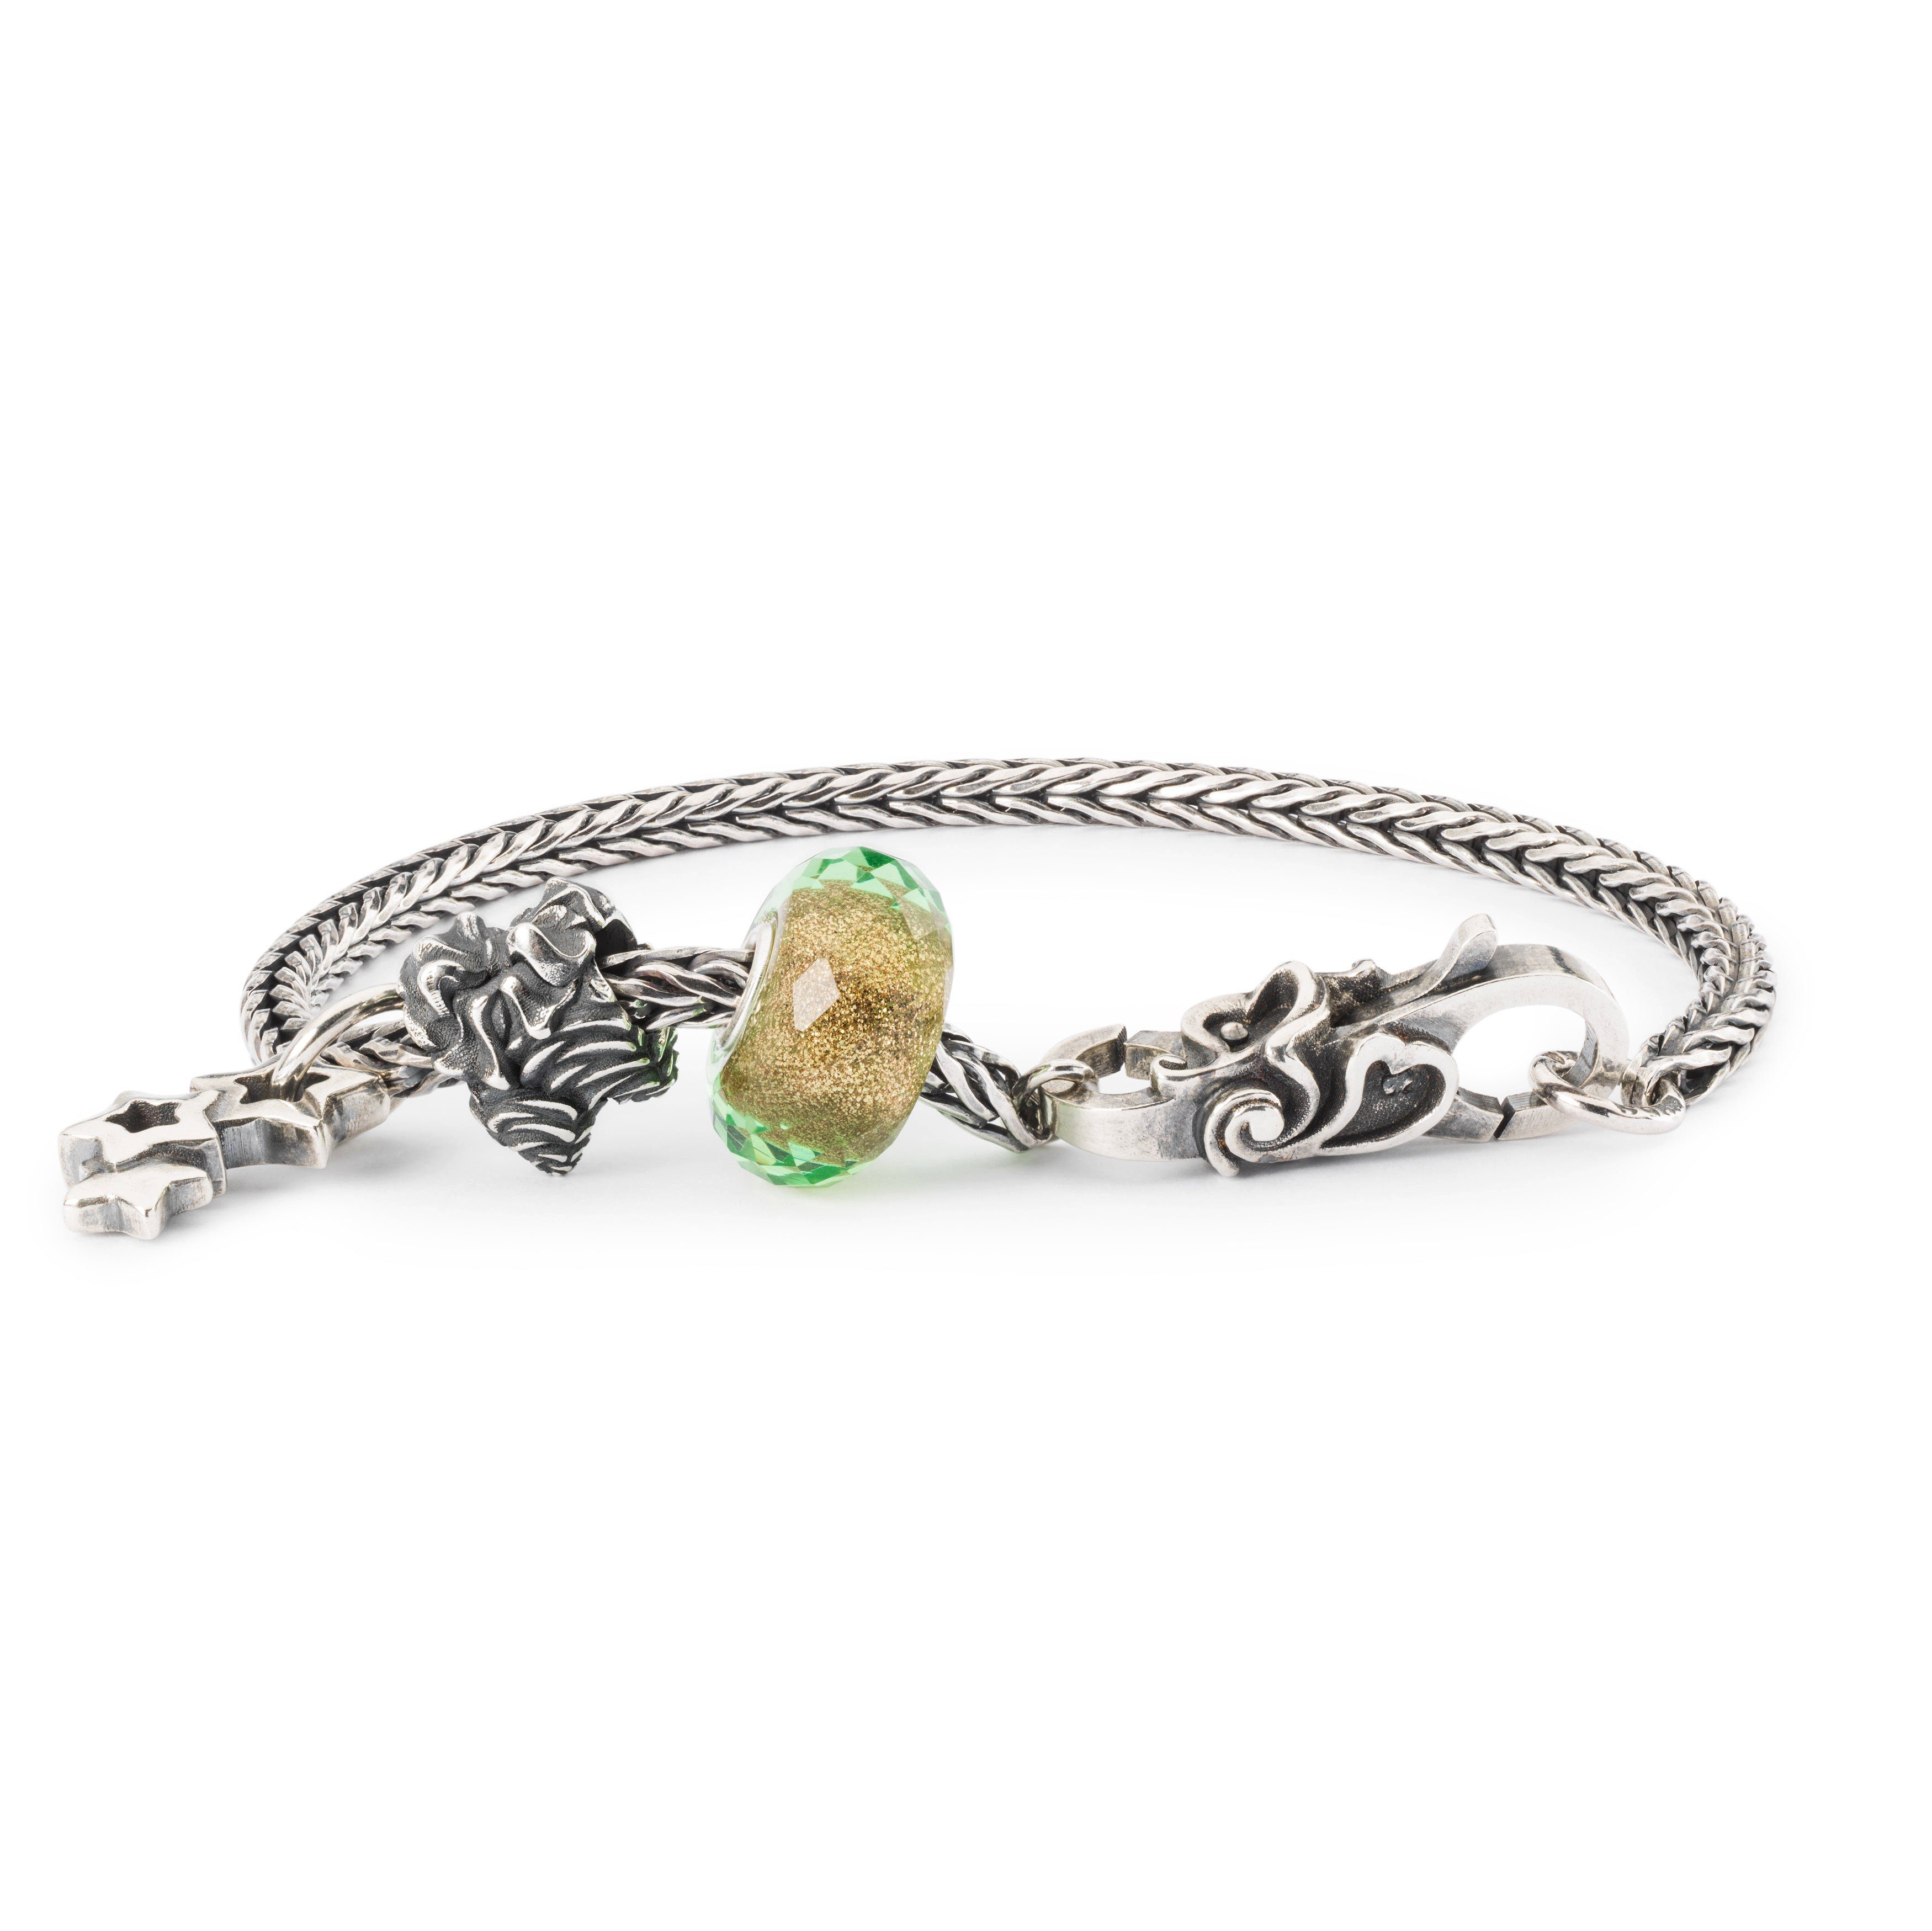 Trollbeads Charm-Armband Sternenlicht - Limitiertes Designerarmband, TAGBO-01815